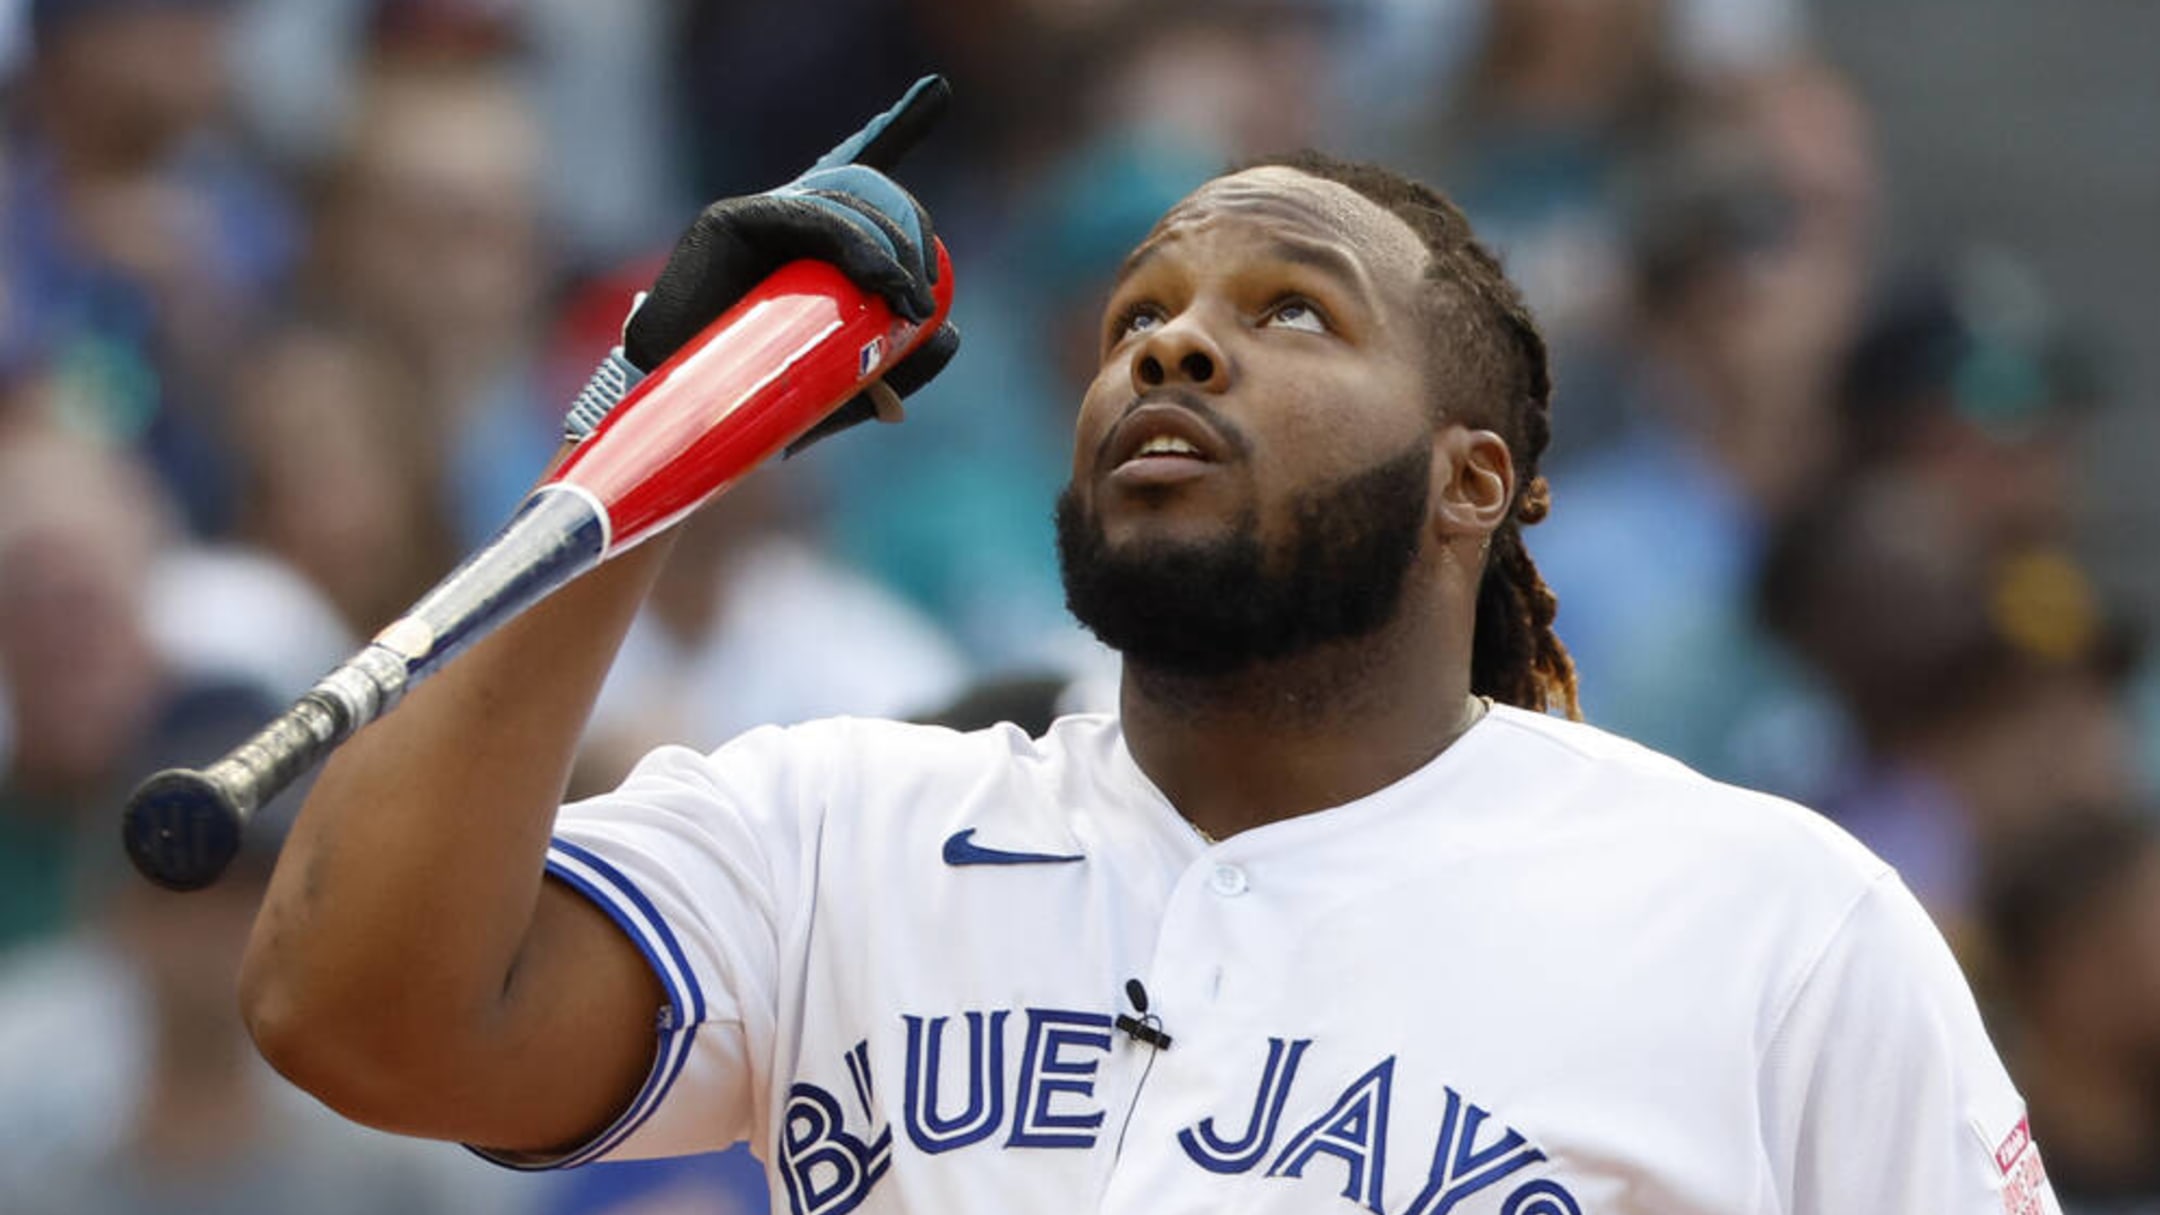 Vladimir Guerrero Jr. and Senior become first father-son duo to win MLB Home  Run Derby